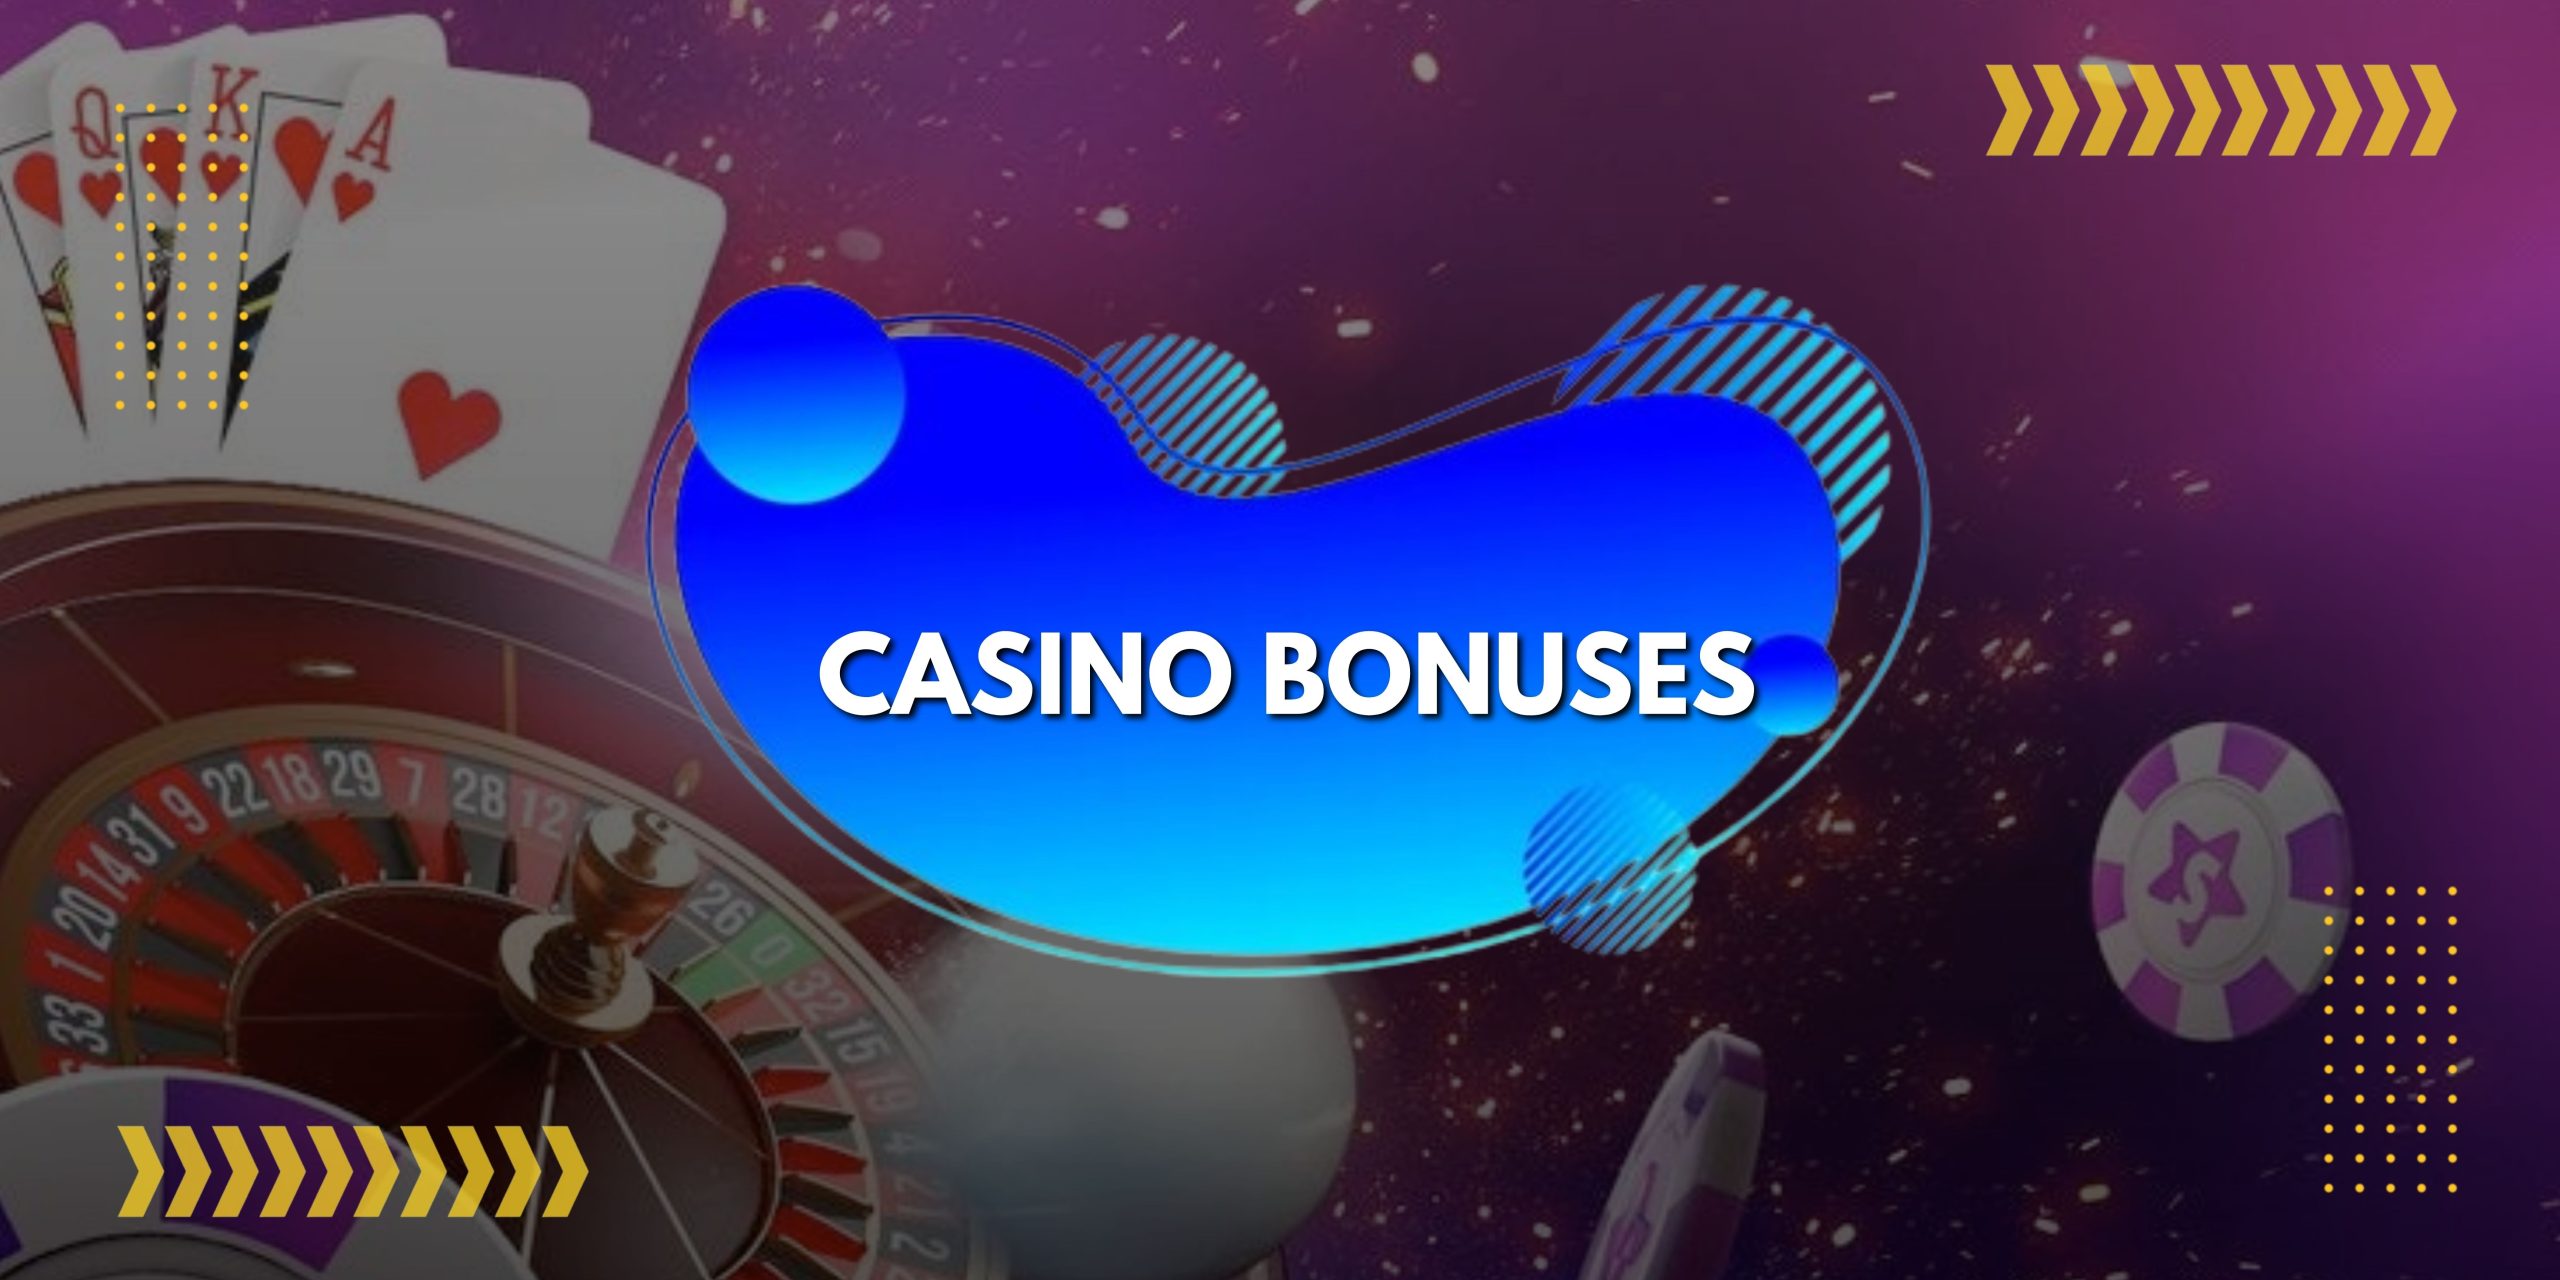 All Details of Gifts at Different Online Casinos